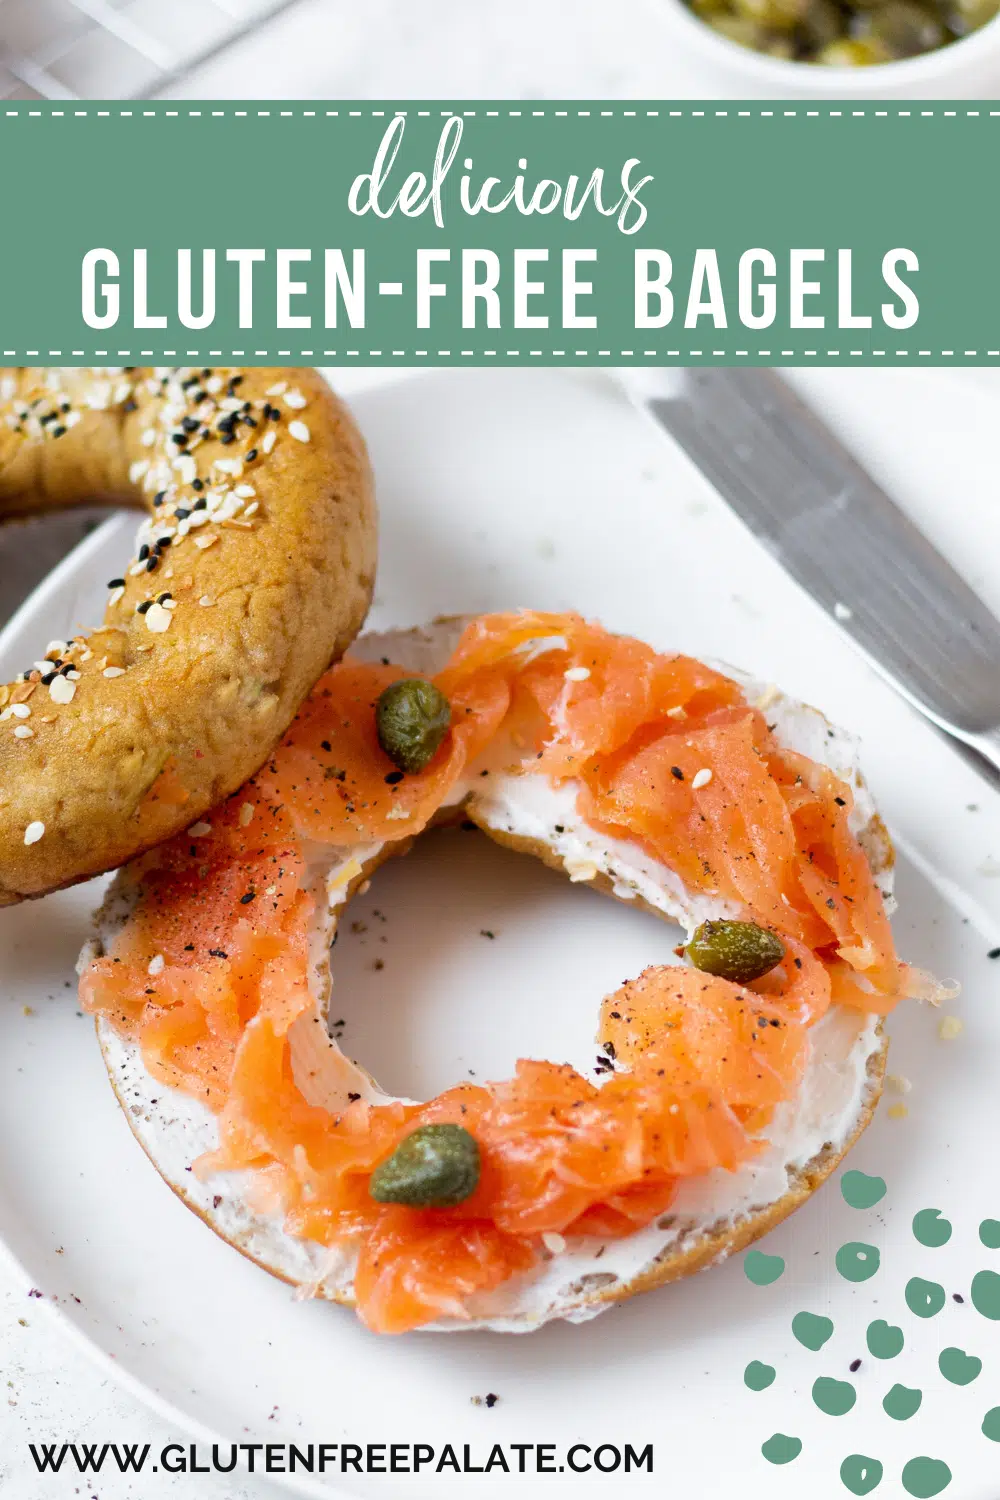 a homemade gluten free bagel topped with cream cheese, lox, and capers on a white plate. Text overlay on image says "delicious gluten-free bagels"